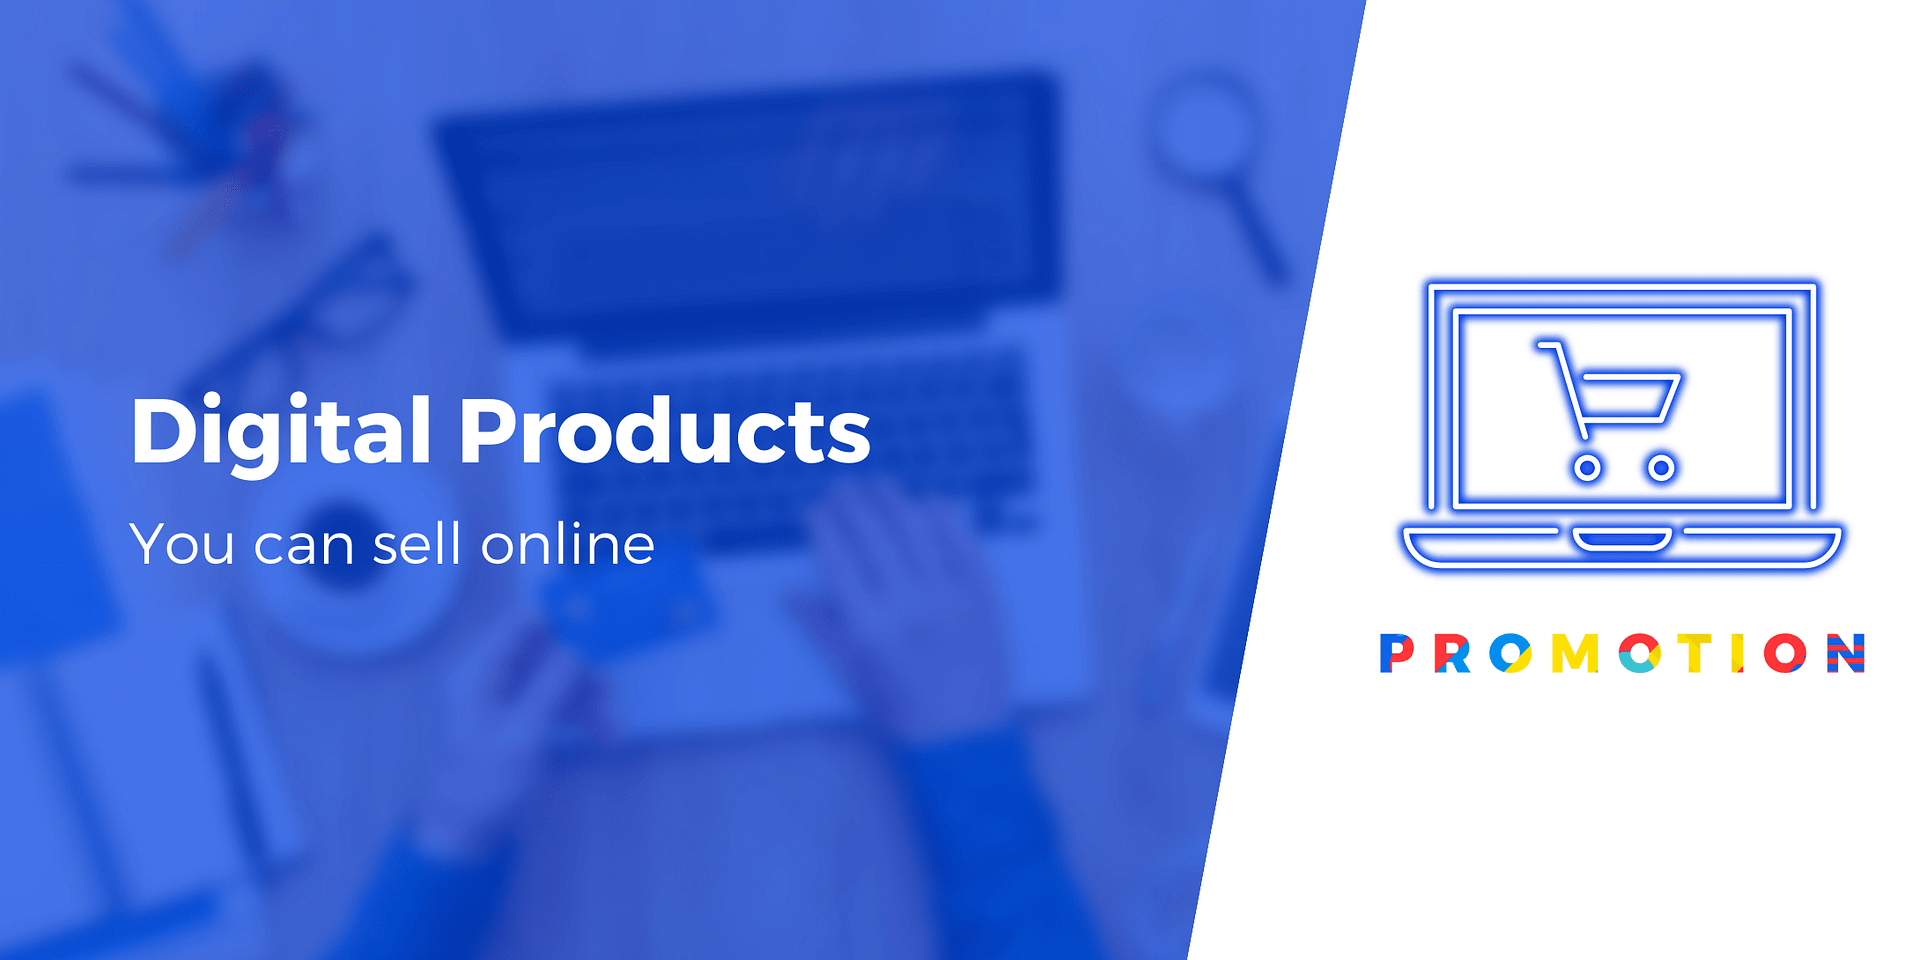 Selling Digital products on , Everything you need to know